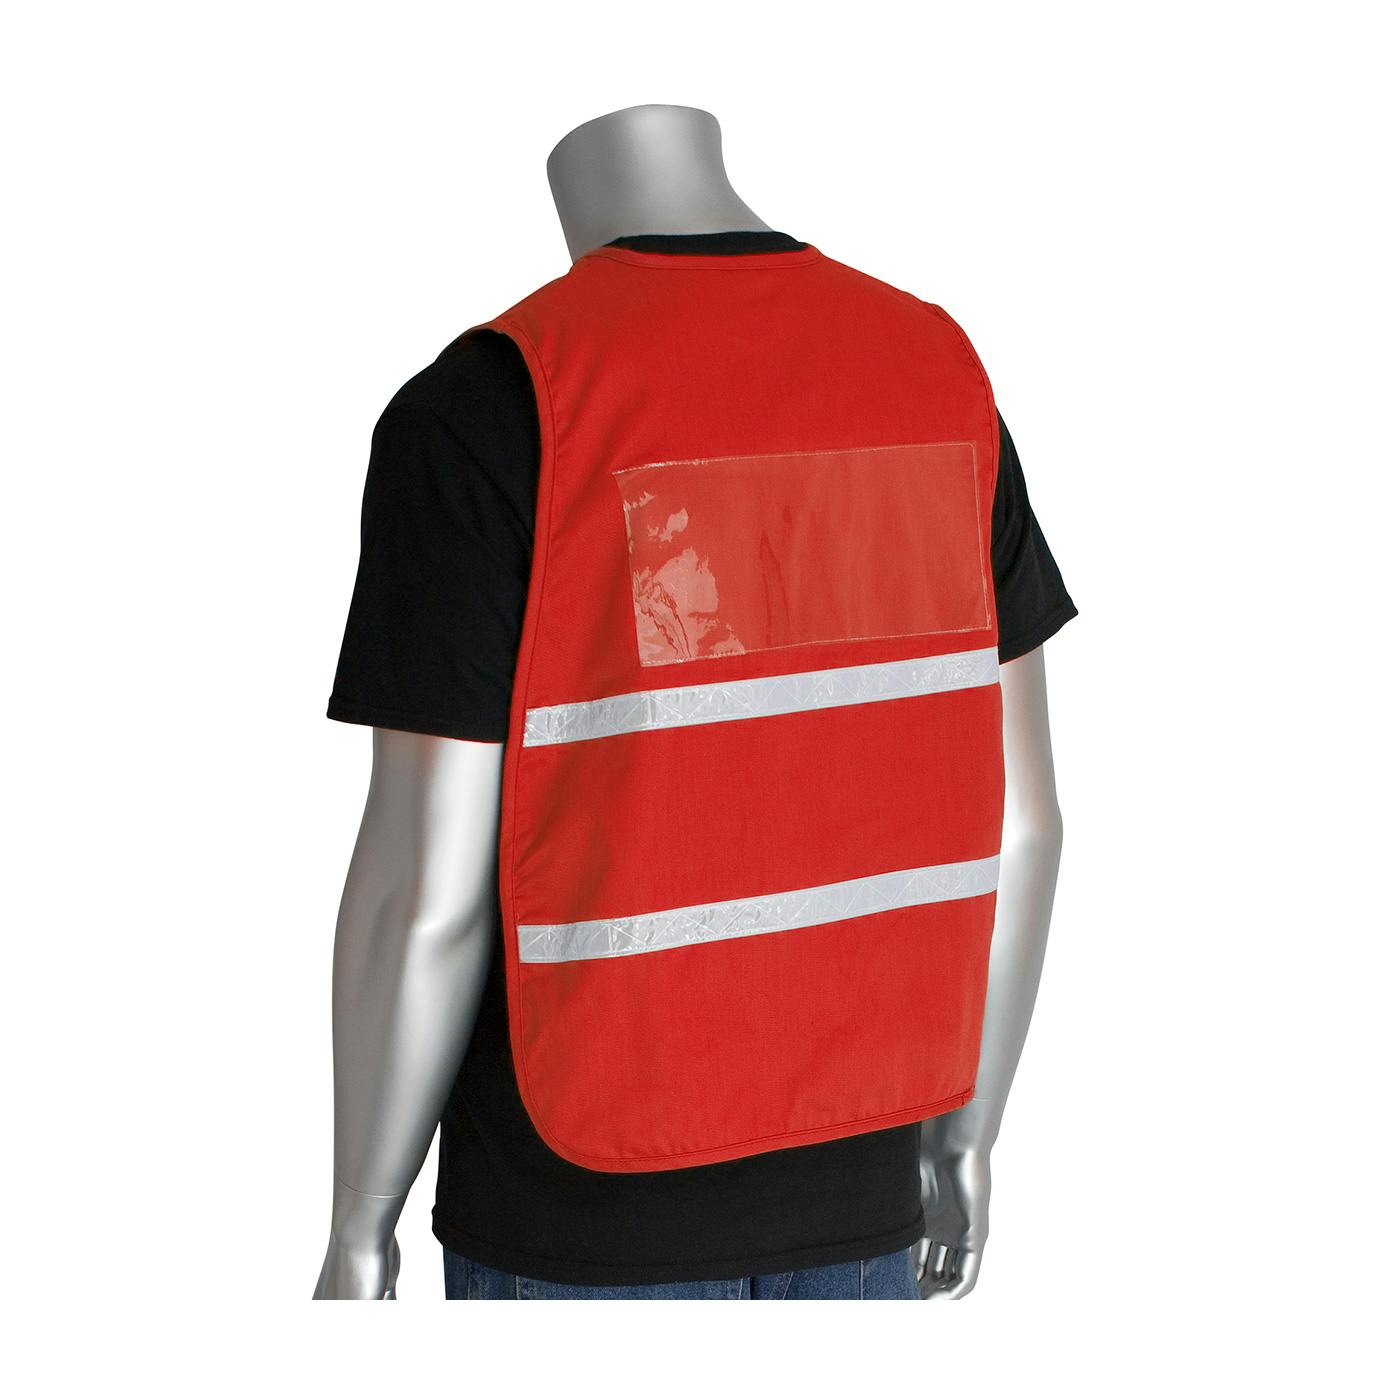 Non-ANSI Incident Command Vest - Cotton/Polyester Blend, Red (300-2508)